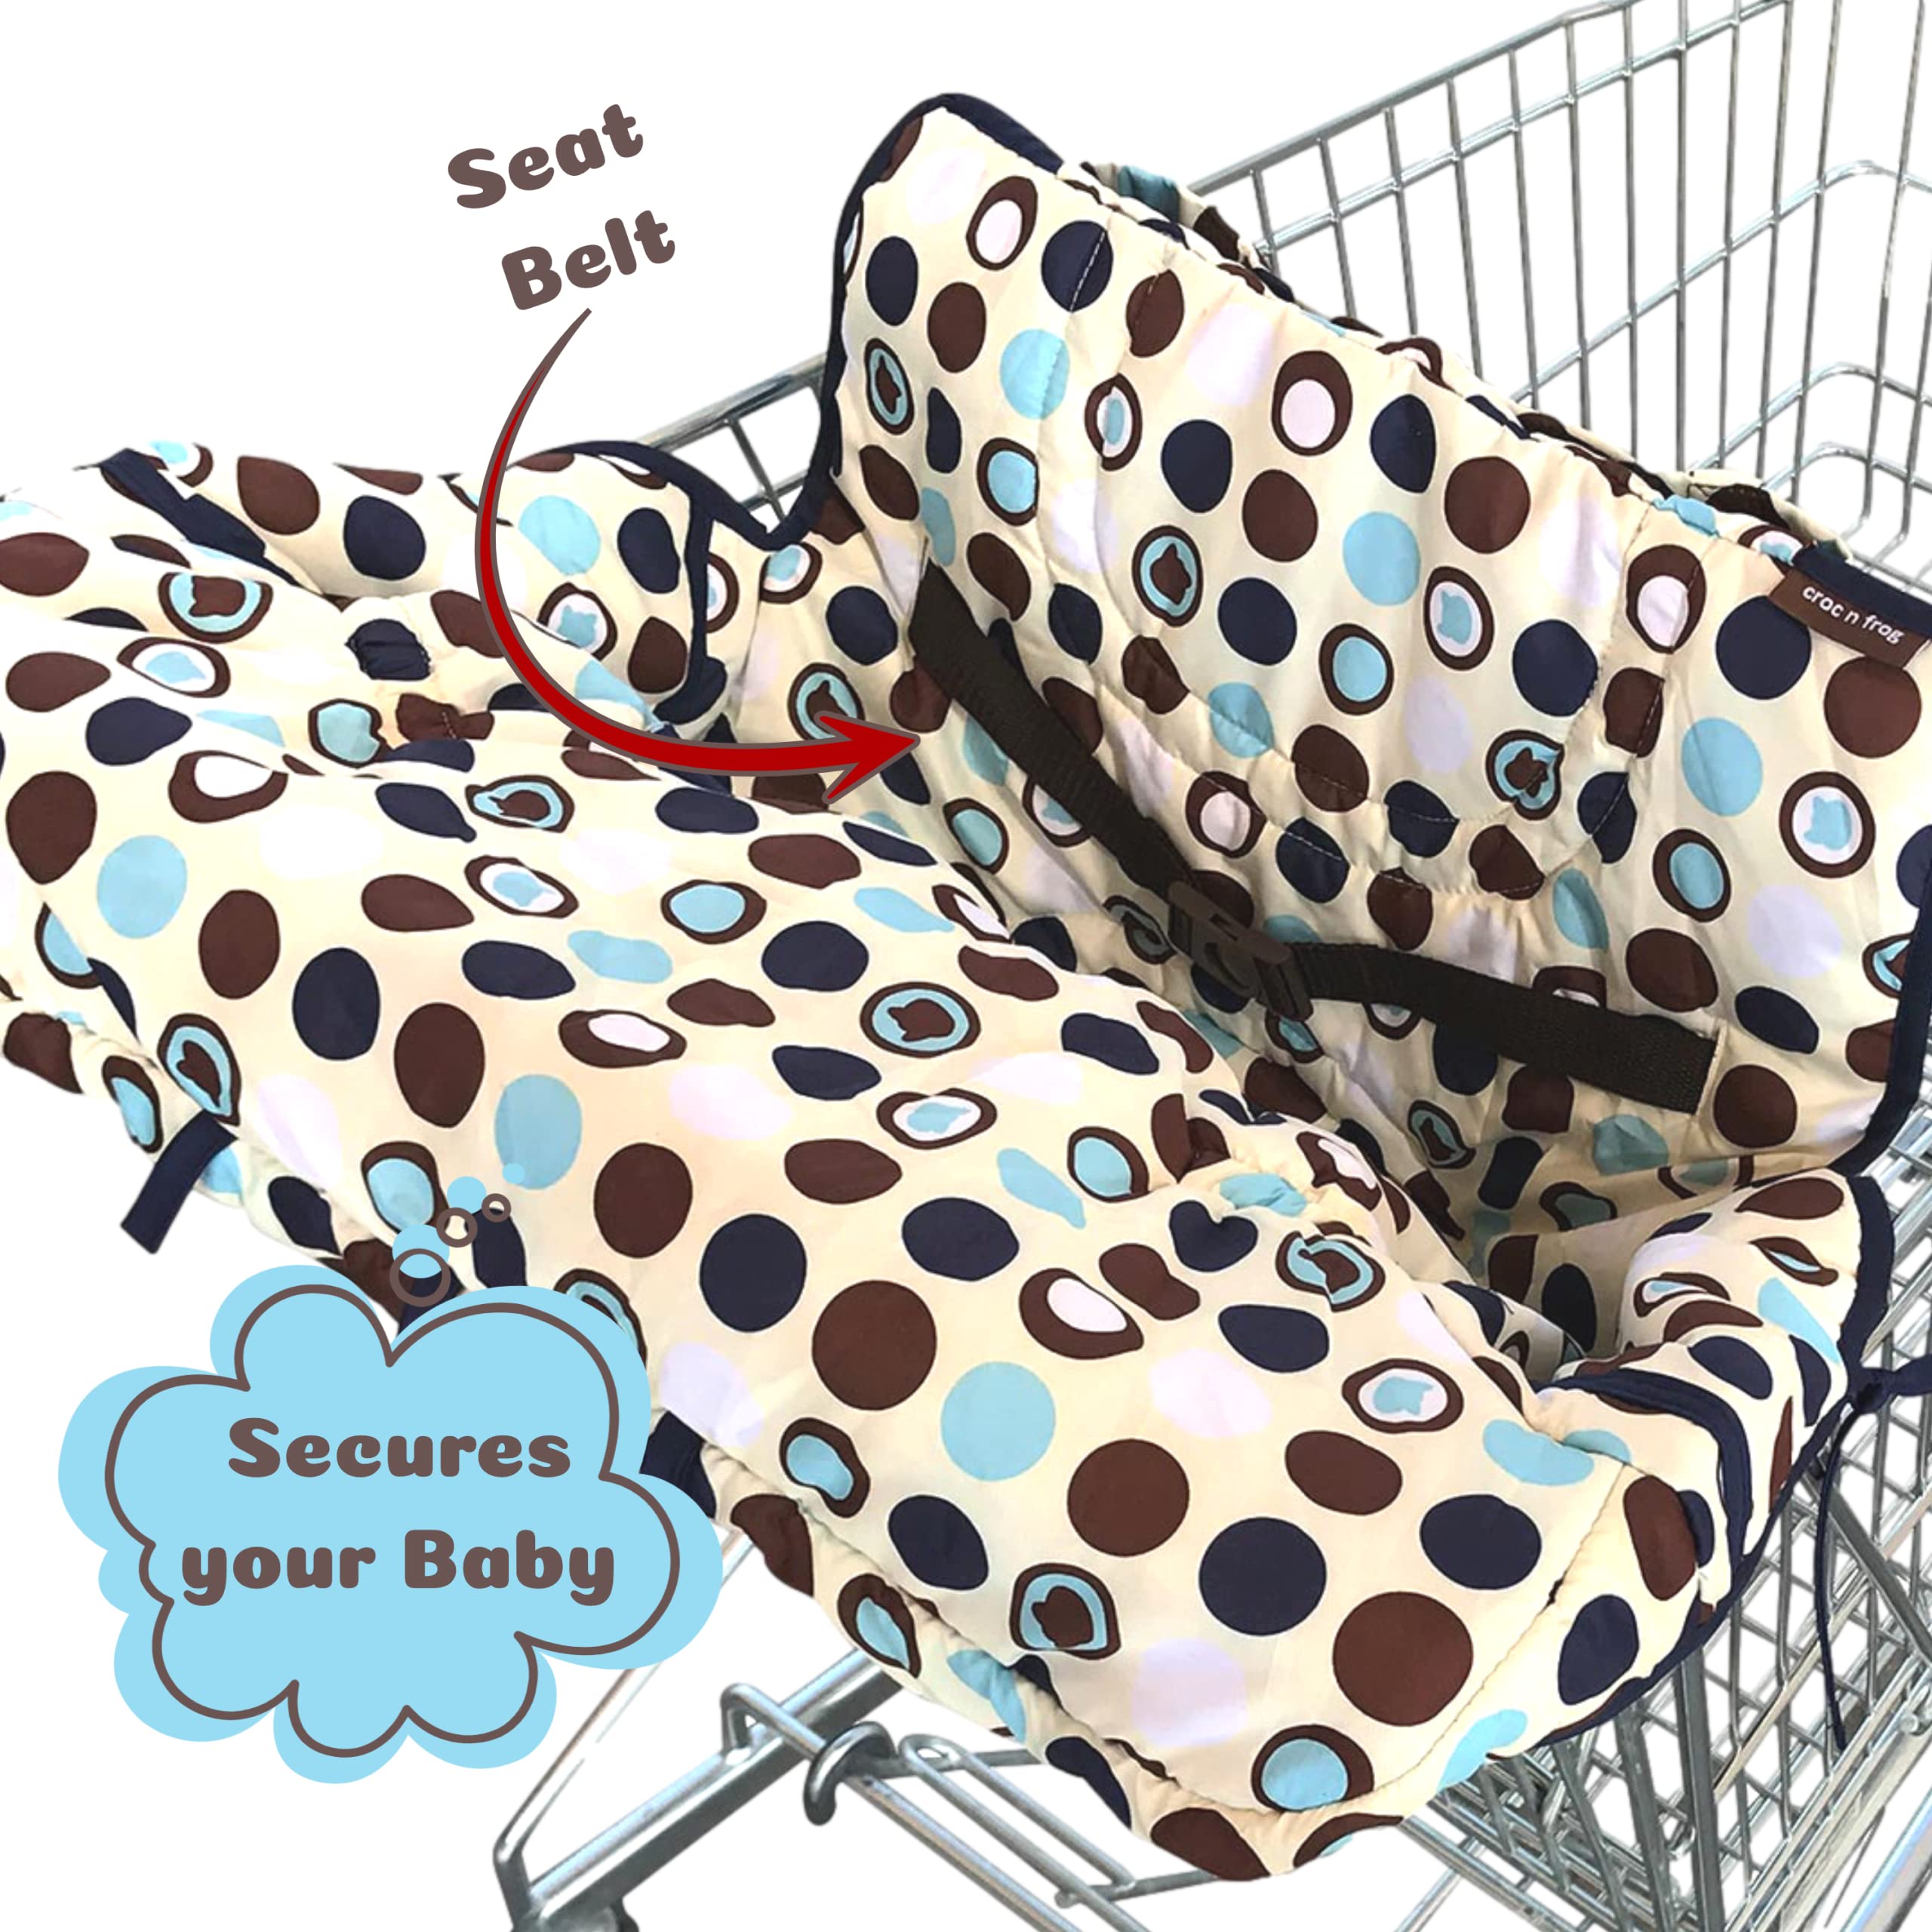 Shopping Cart Cover for Baby and High Chair Cover - 2 in 1 - Cart Cover for Girl or Boy - Soft Padded - 3 Toy Loops and Bottle Holder Included - Easy to Fold and Carry - Machine Washable - Perfect Baby Shower Gifts or Favors